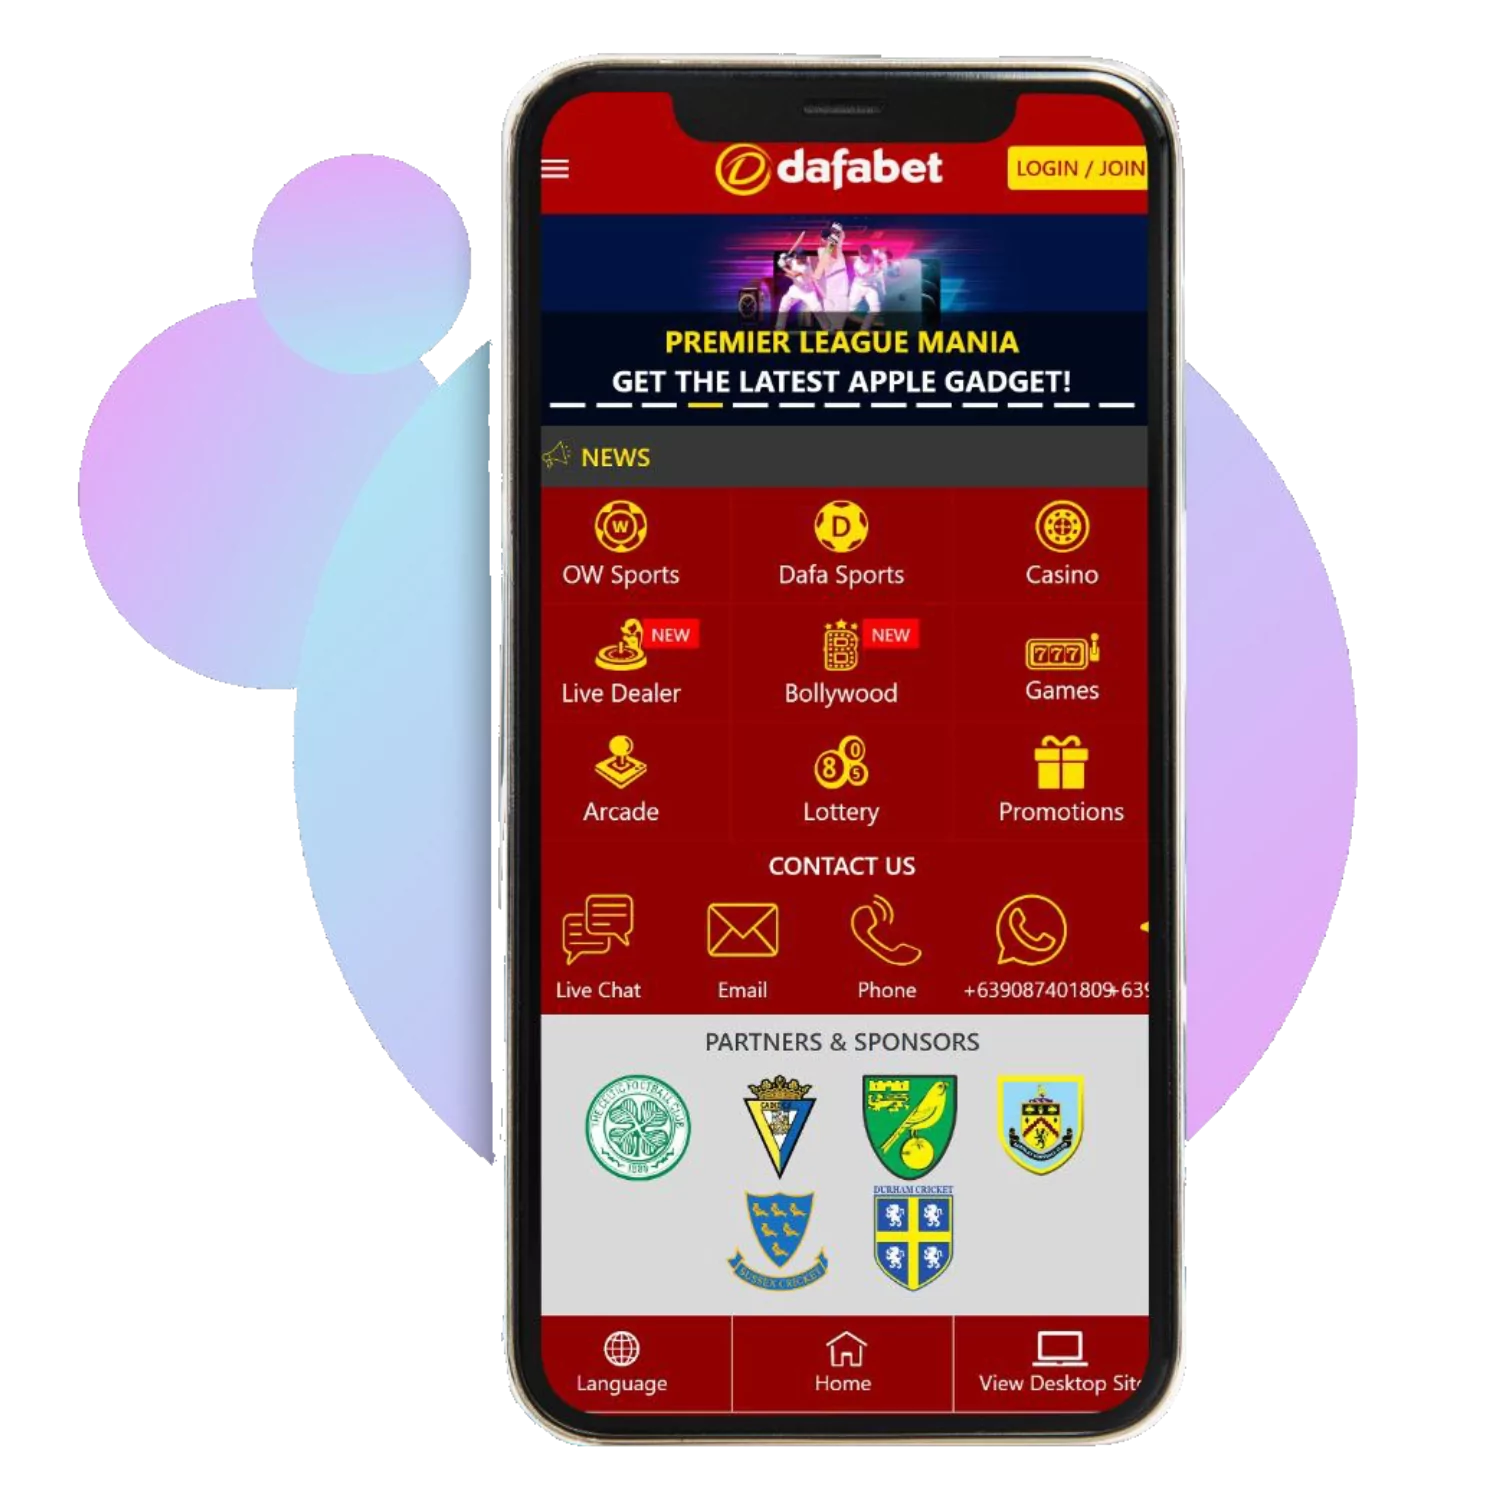 Install the Dafabet app and start cricket betting from your mobile phone.